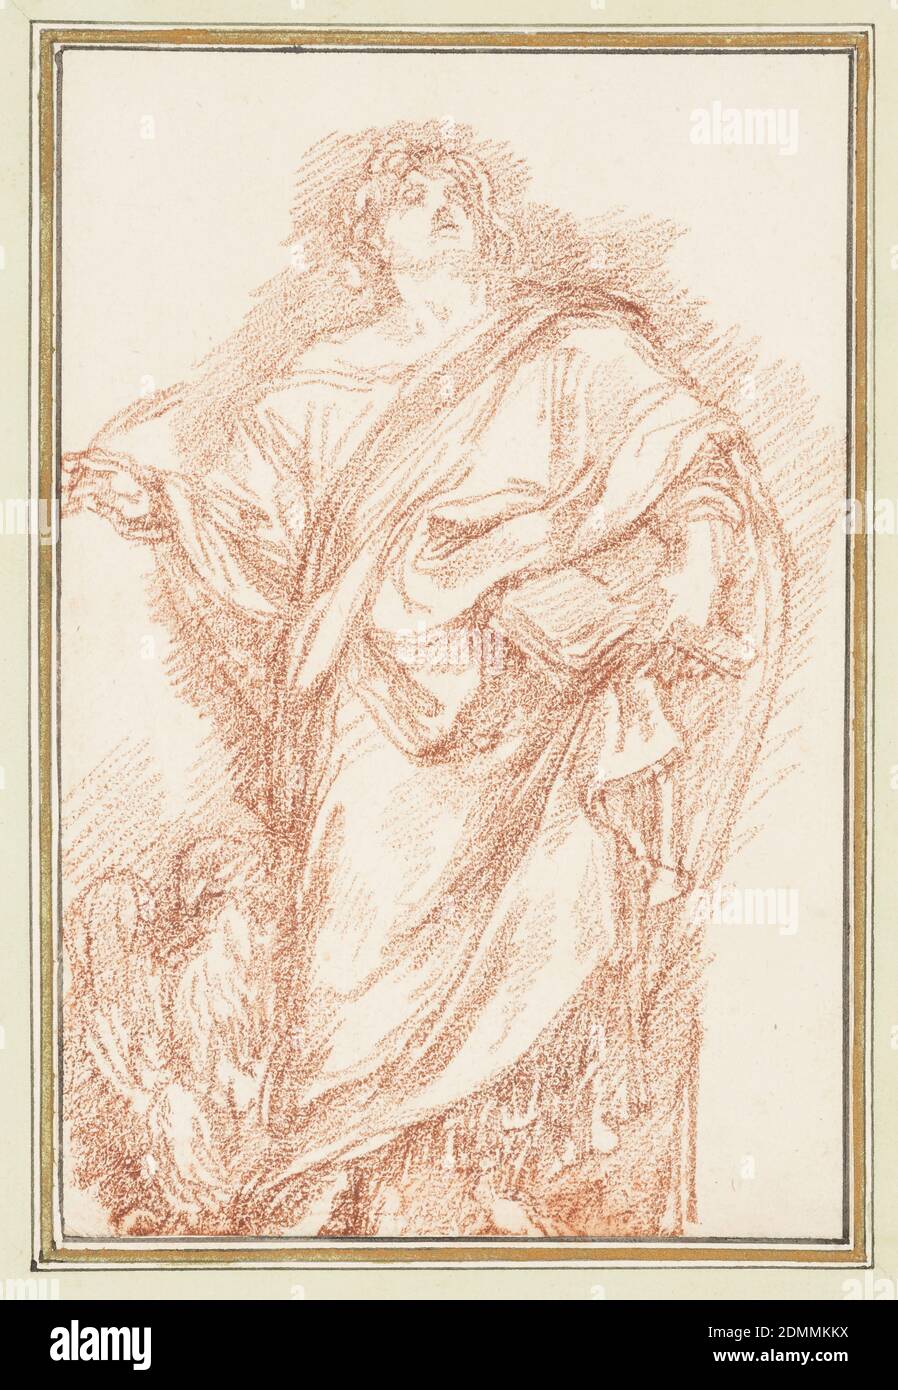 St. John from St. John Lateran's Basilica, Camillo Rusconi, Jean-Robert Ango, French, active in Rome 1759 –1770, d. 1773, Red chalk on paper, Drawing after statue by Camillo Rusconi of St. John the Baptist from St. John Lateran's Basilica (S. Giovanni in Laterano). St. John's head is tilted upward. He holds an open book against his body in his left hand and holds a quill in his right. A large eagle is at his right., France, ca. 1759–70, figures, Drawing Stock Photo